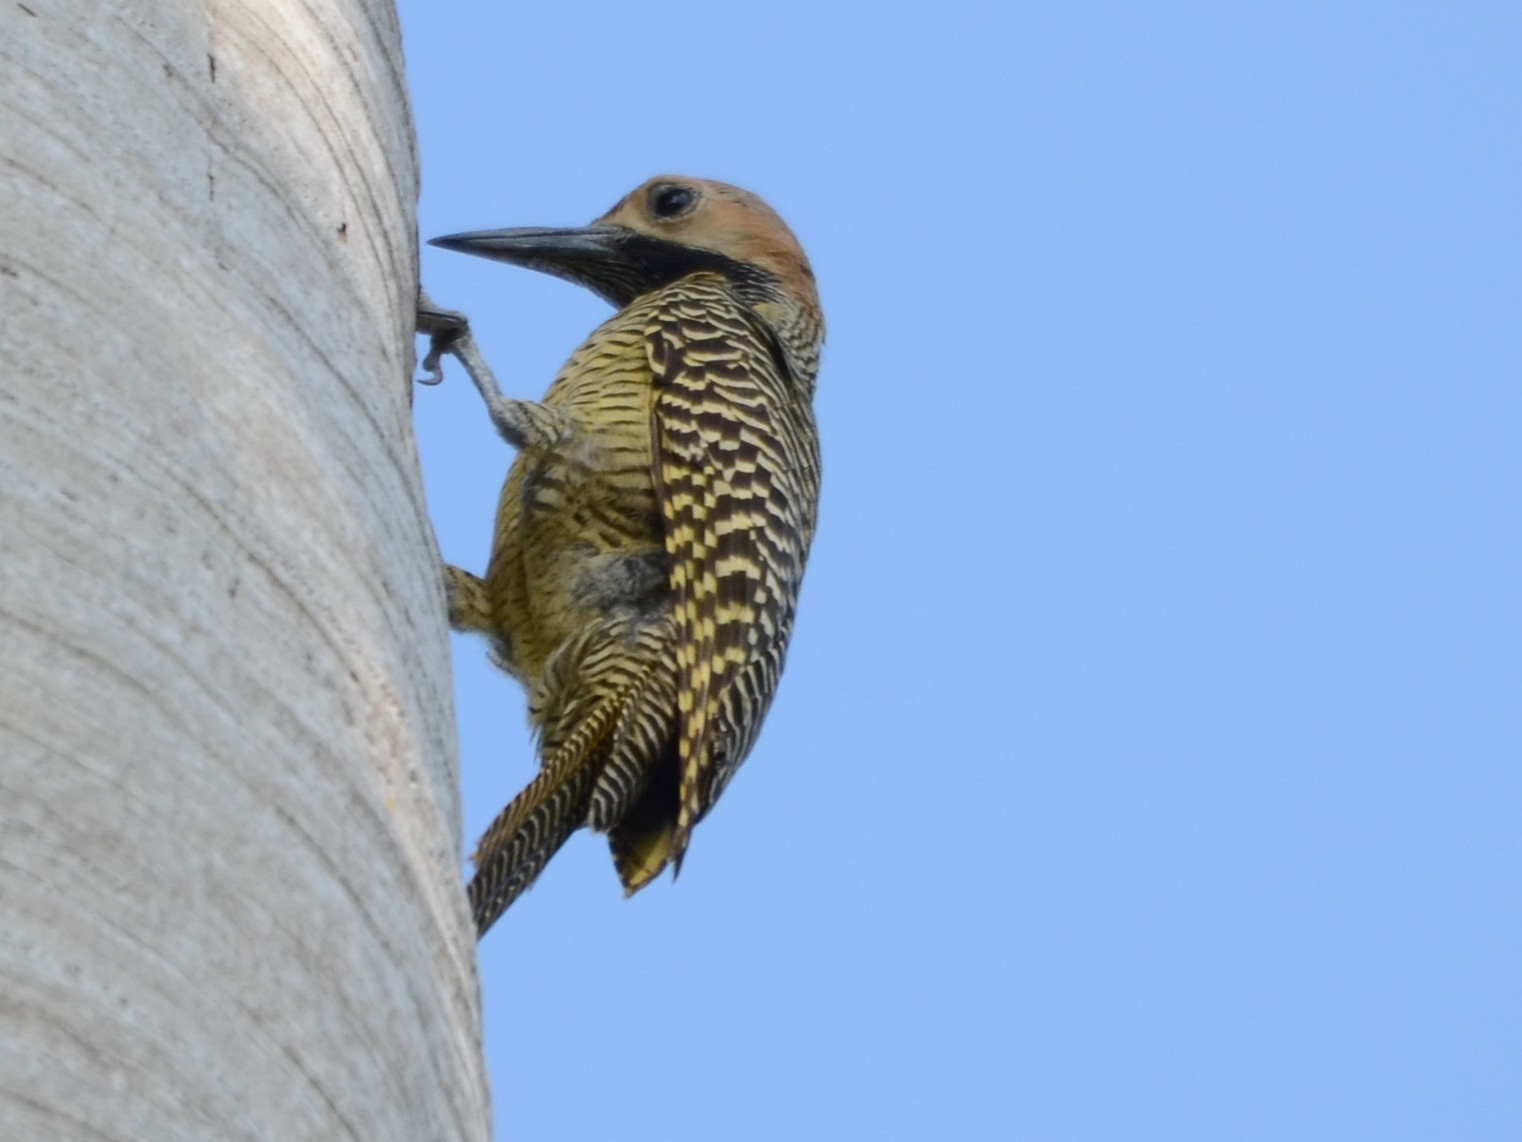 Click picture to see more Fernandina's Flickers.